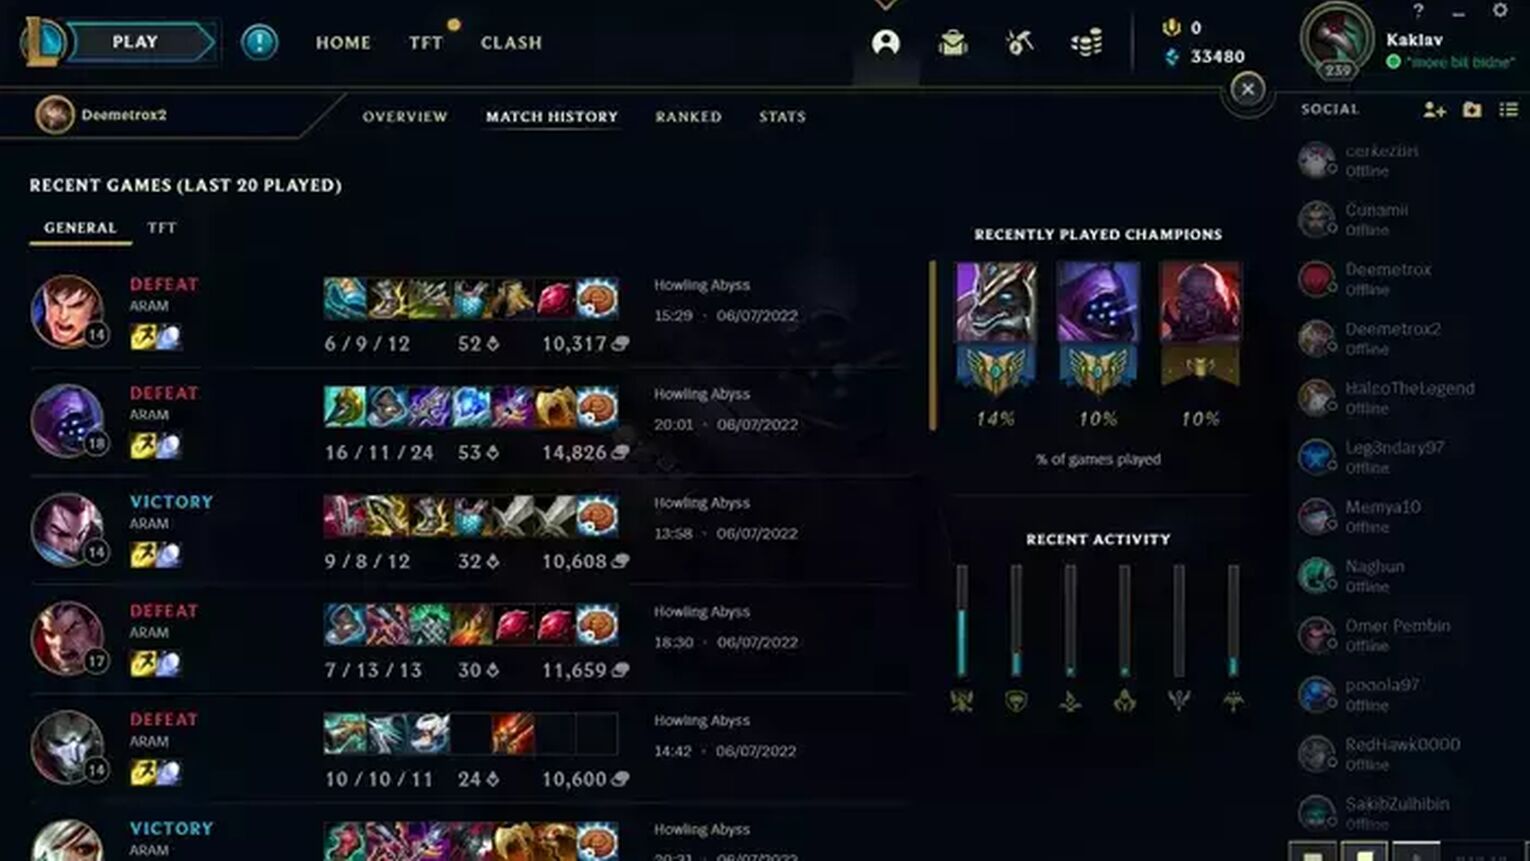 Fix normals matchmaking with high Elo players : r/leagueoflegends